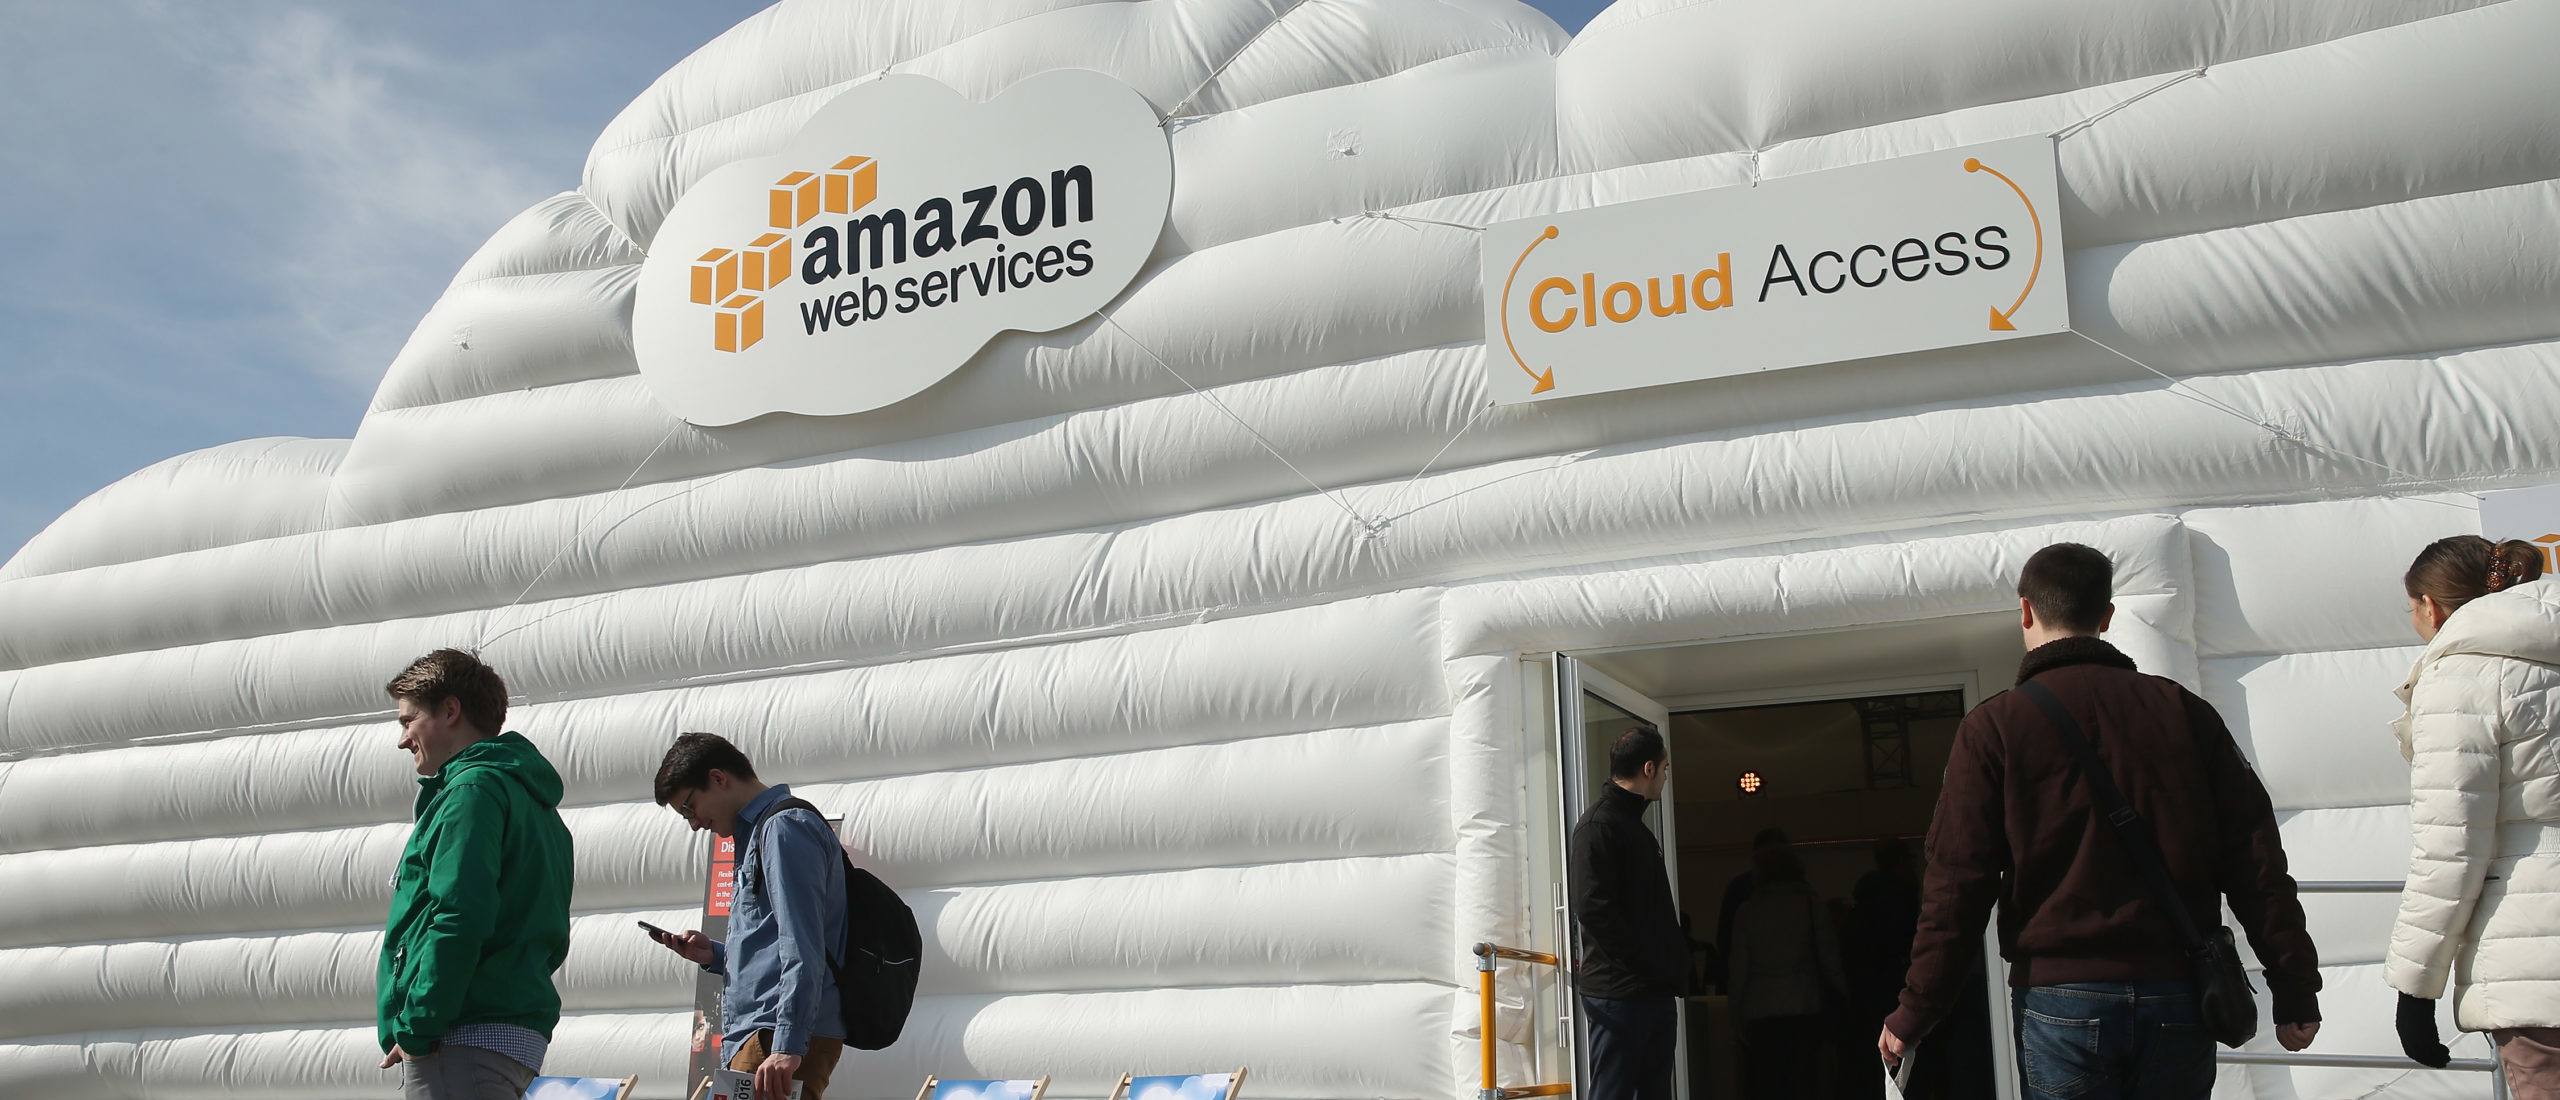 Visitors arrive at the cloud pavillion of Amazon Web Services at the 2016 CeBIT digital technology trade fair on the fair's opening day on March 14, 2016 in Hanover, Germany. (Photo by Sean Gallup/Getty Images)